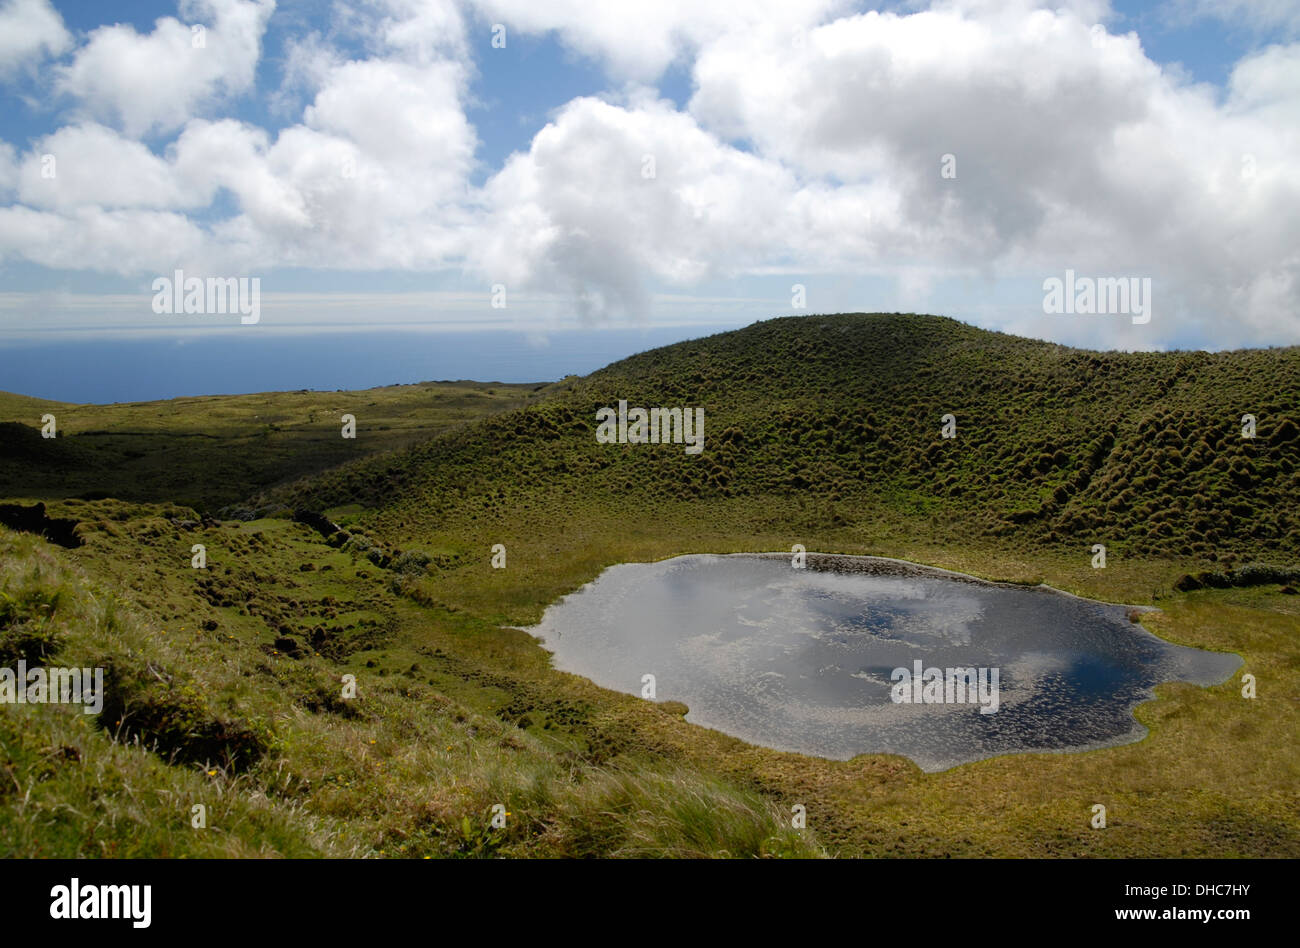 Small cater lake on the rim in the East of Pico Island, Azores, Portugal Stock Photo